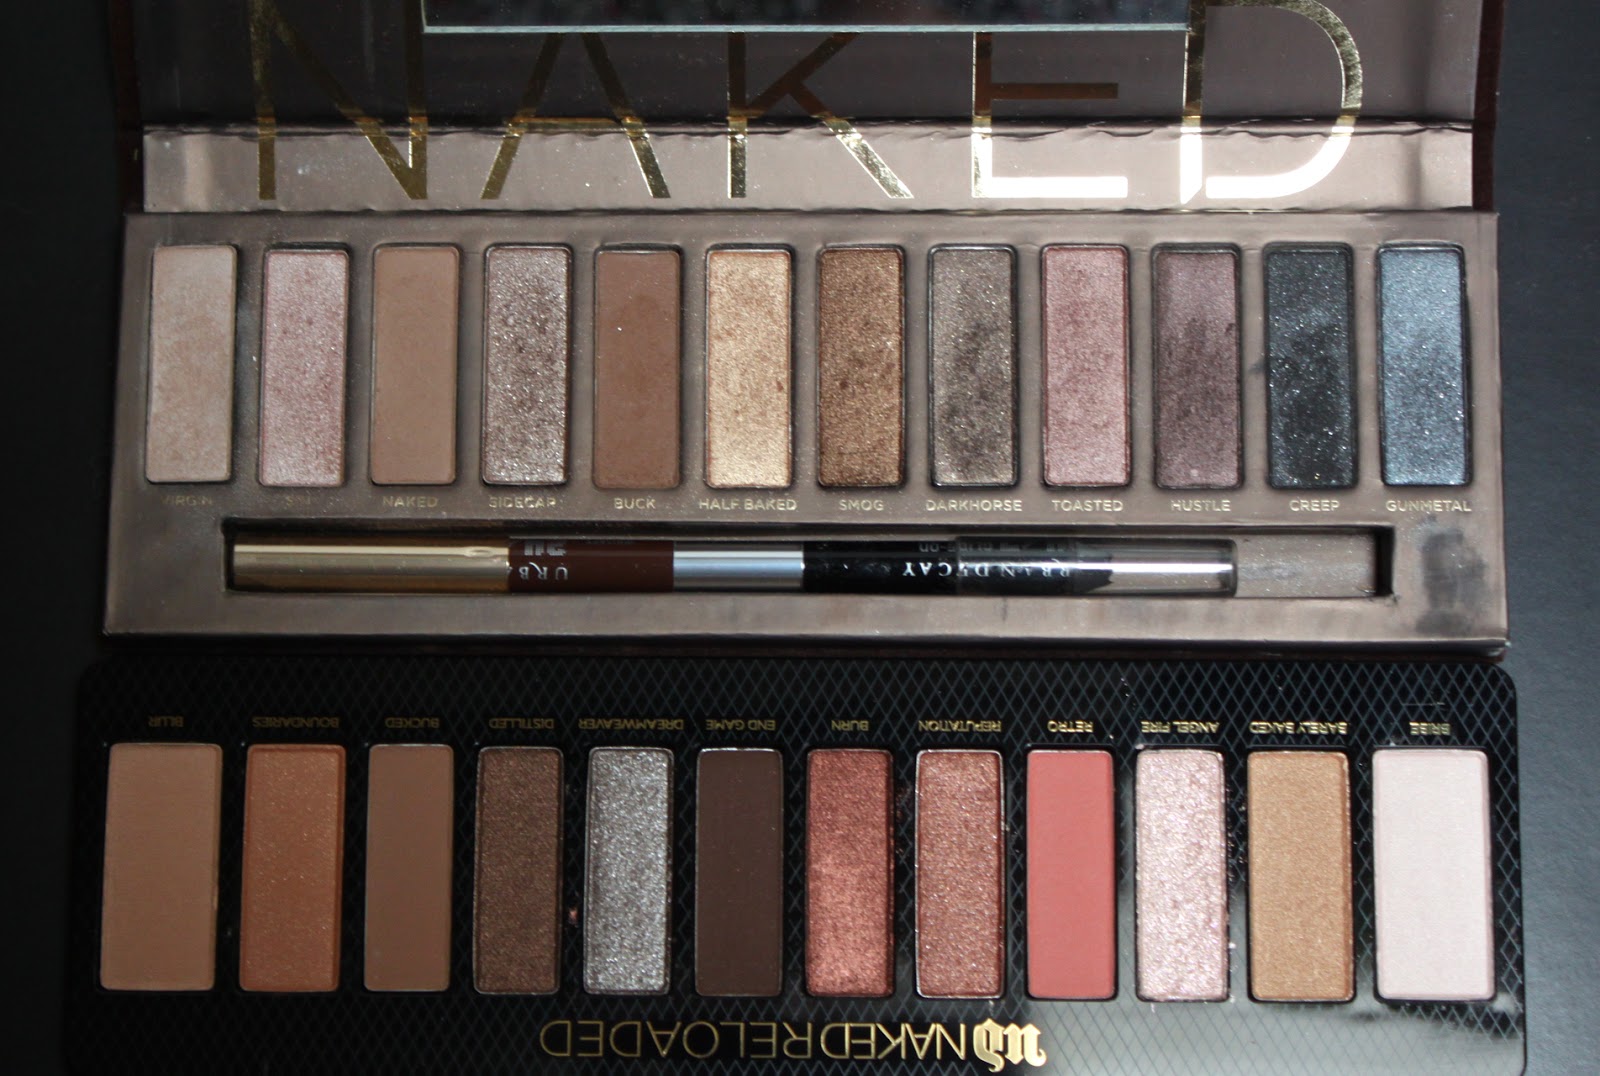 Monroe Misfit Makeup  Beauty Blog: Urban Decay Naked RELOADED Eyeshadow  Palette Review & Swatches